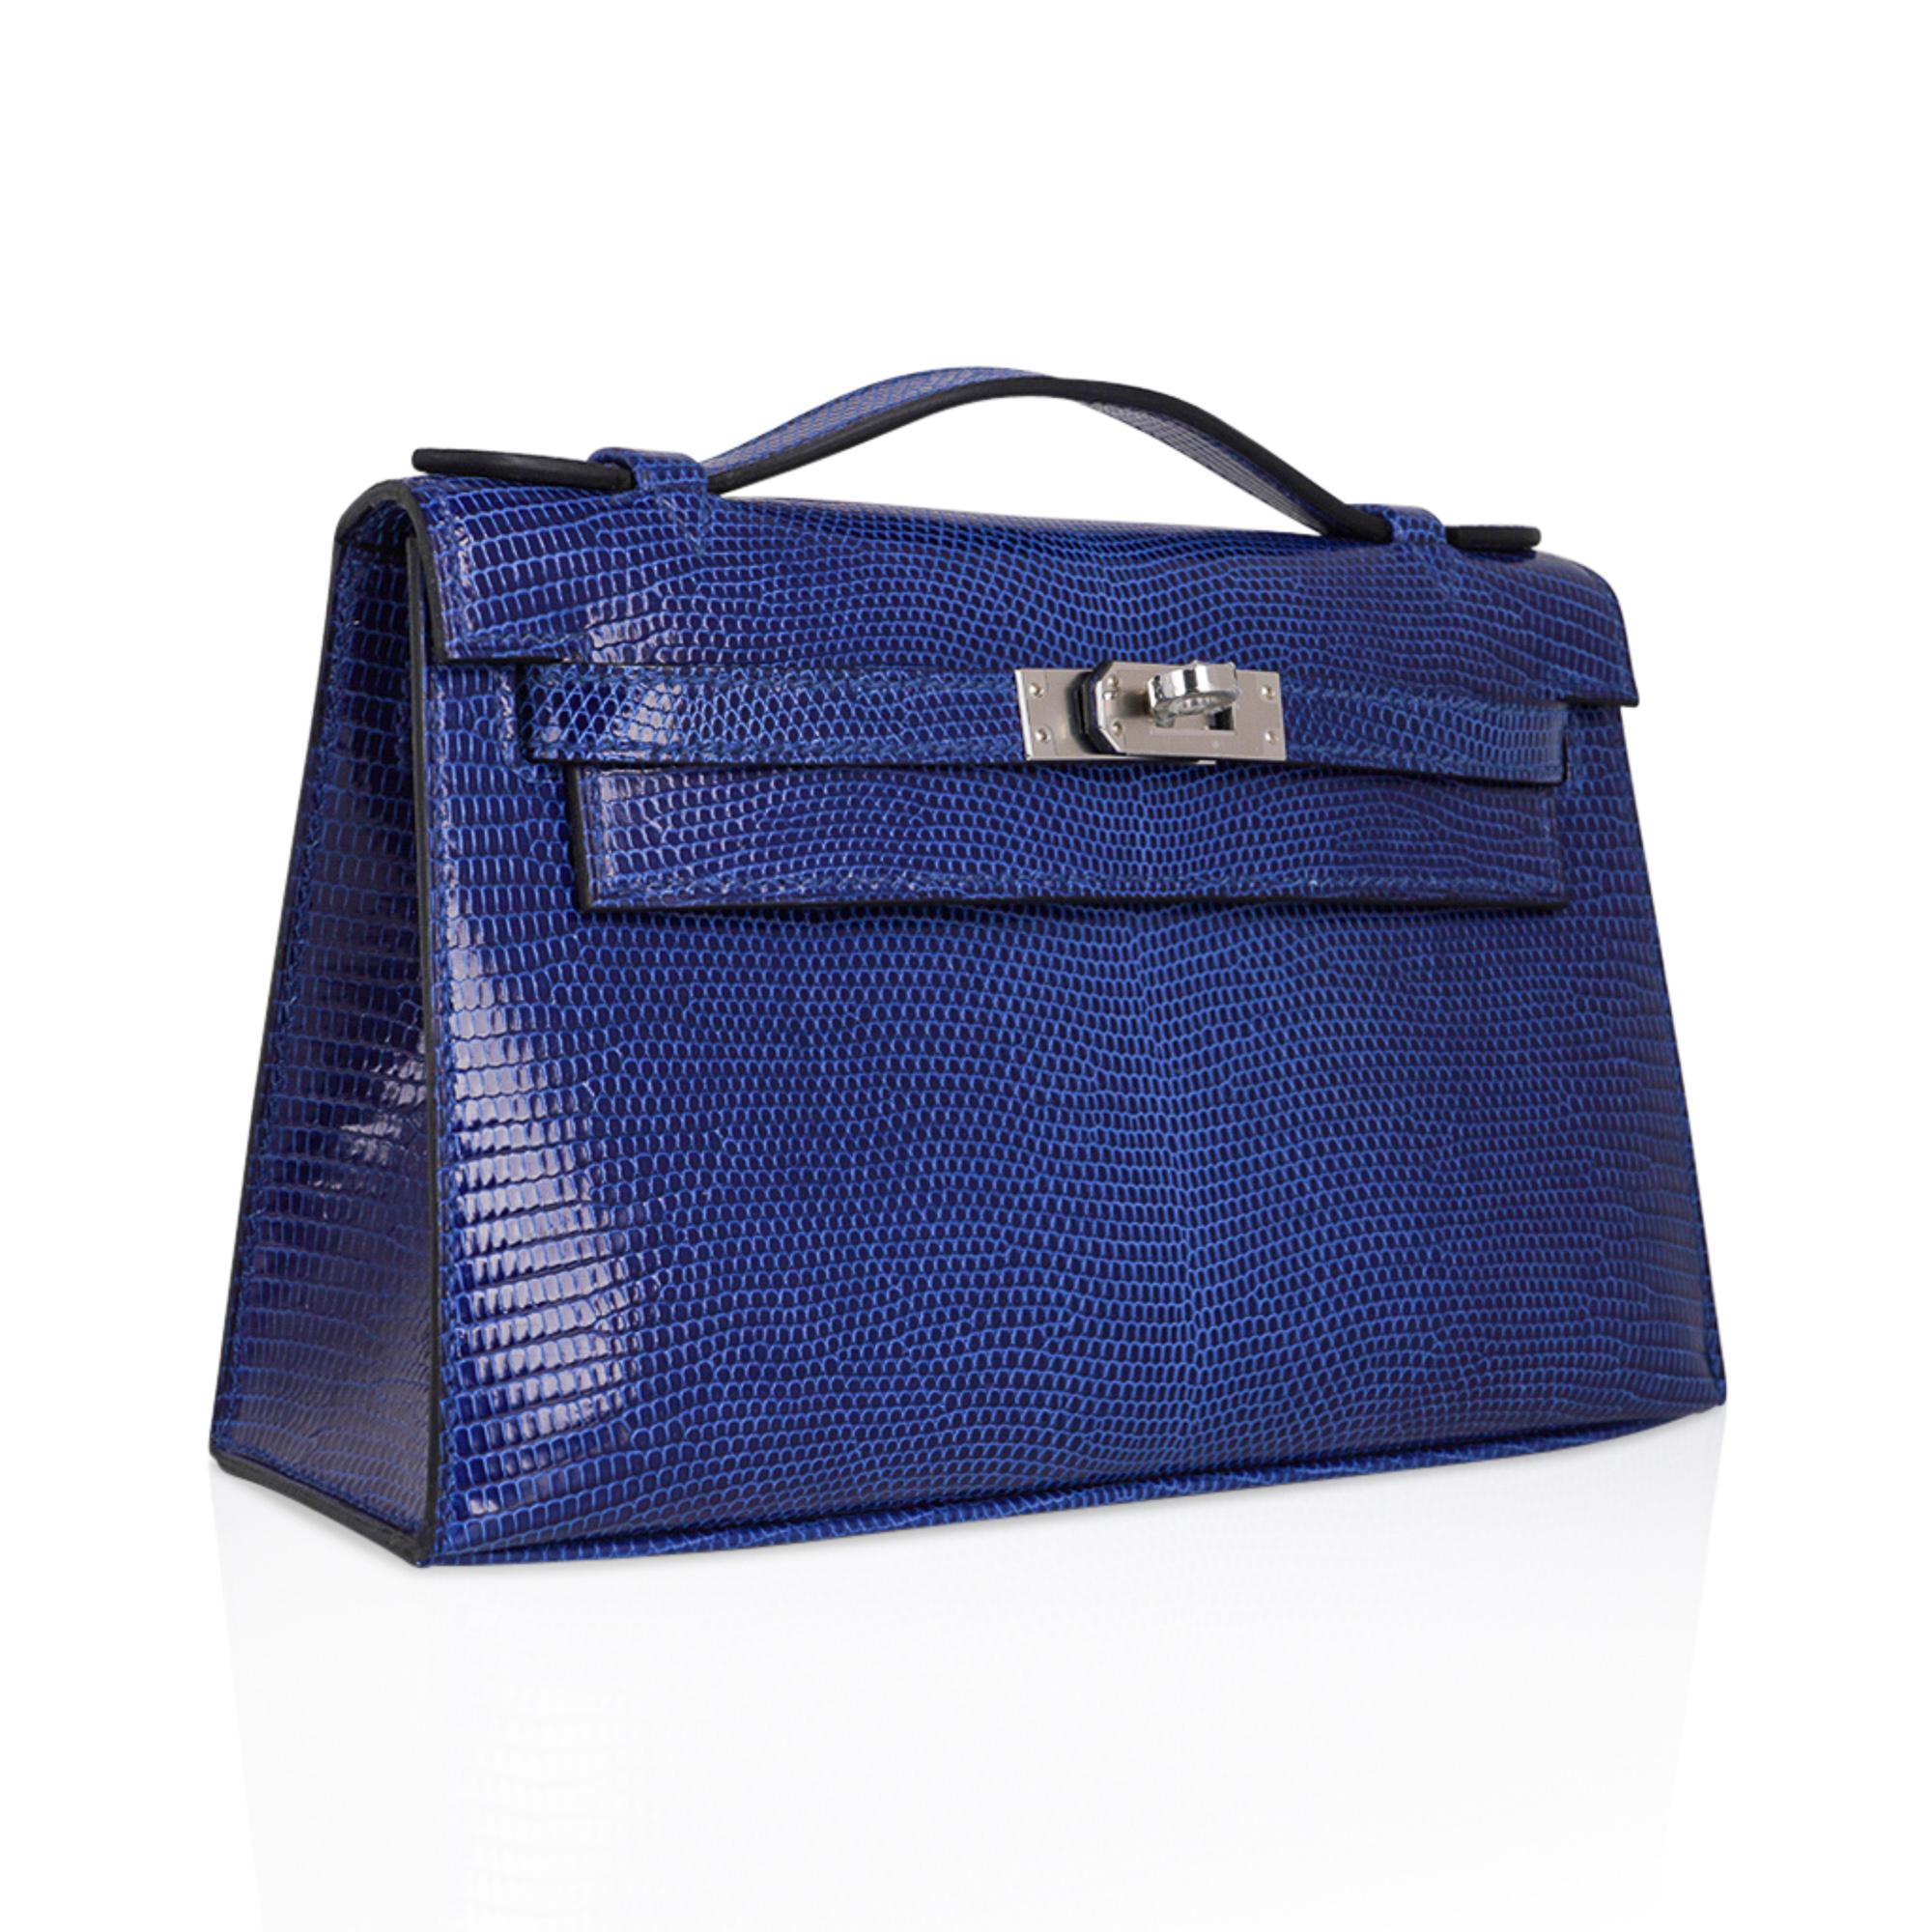 Mightychic offers an Hermes Kelly pochette bag featured in Bleu Saphir Lizard.
This beautiful jewel toned Hermes clutch is fresh with Palladium hardware.
Richly saturated this is a magnificent neutral bag that adds a pop a colour.
Signature stamp on